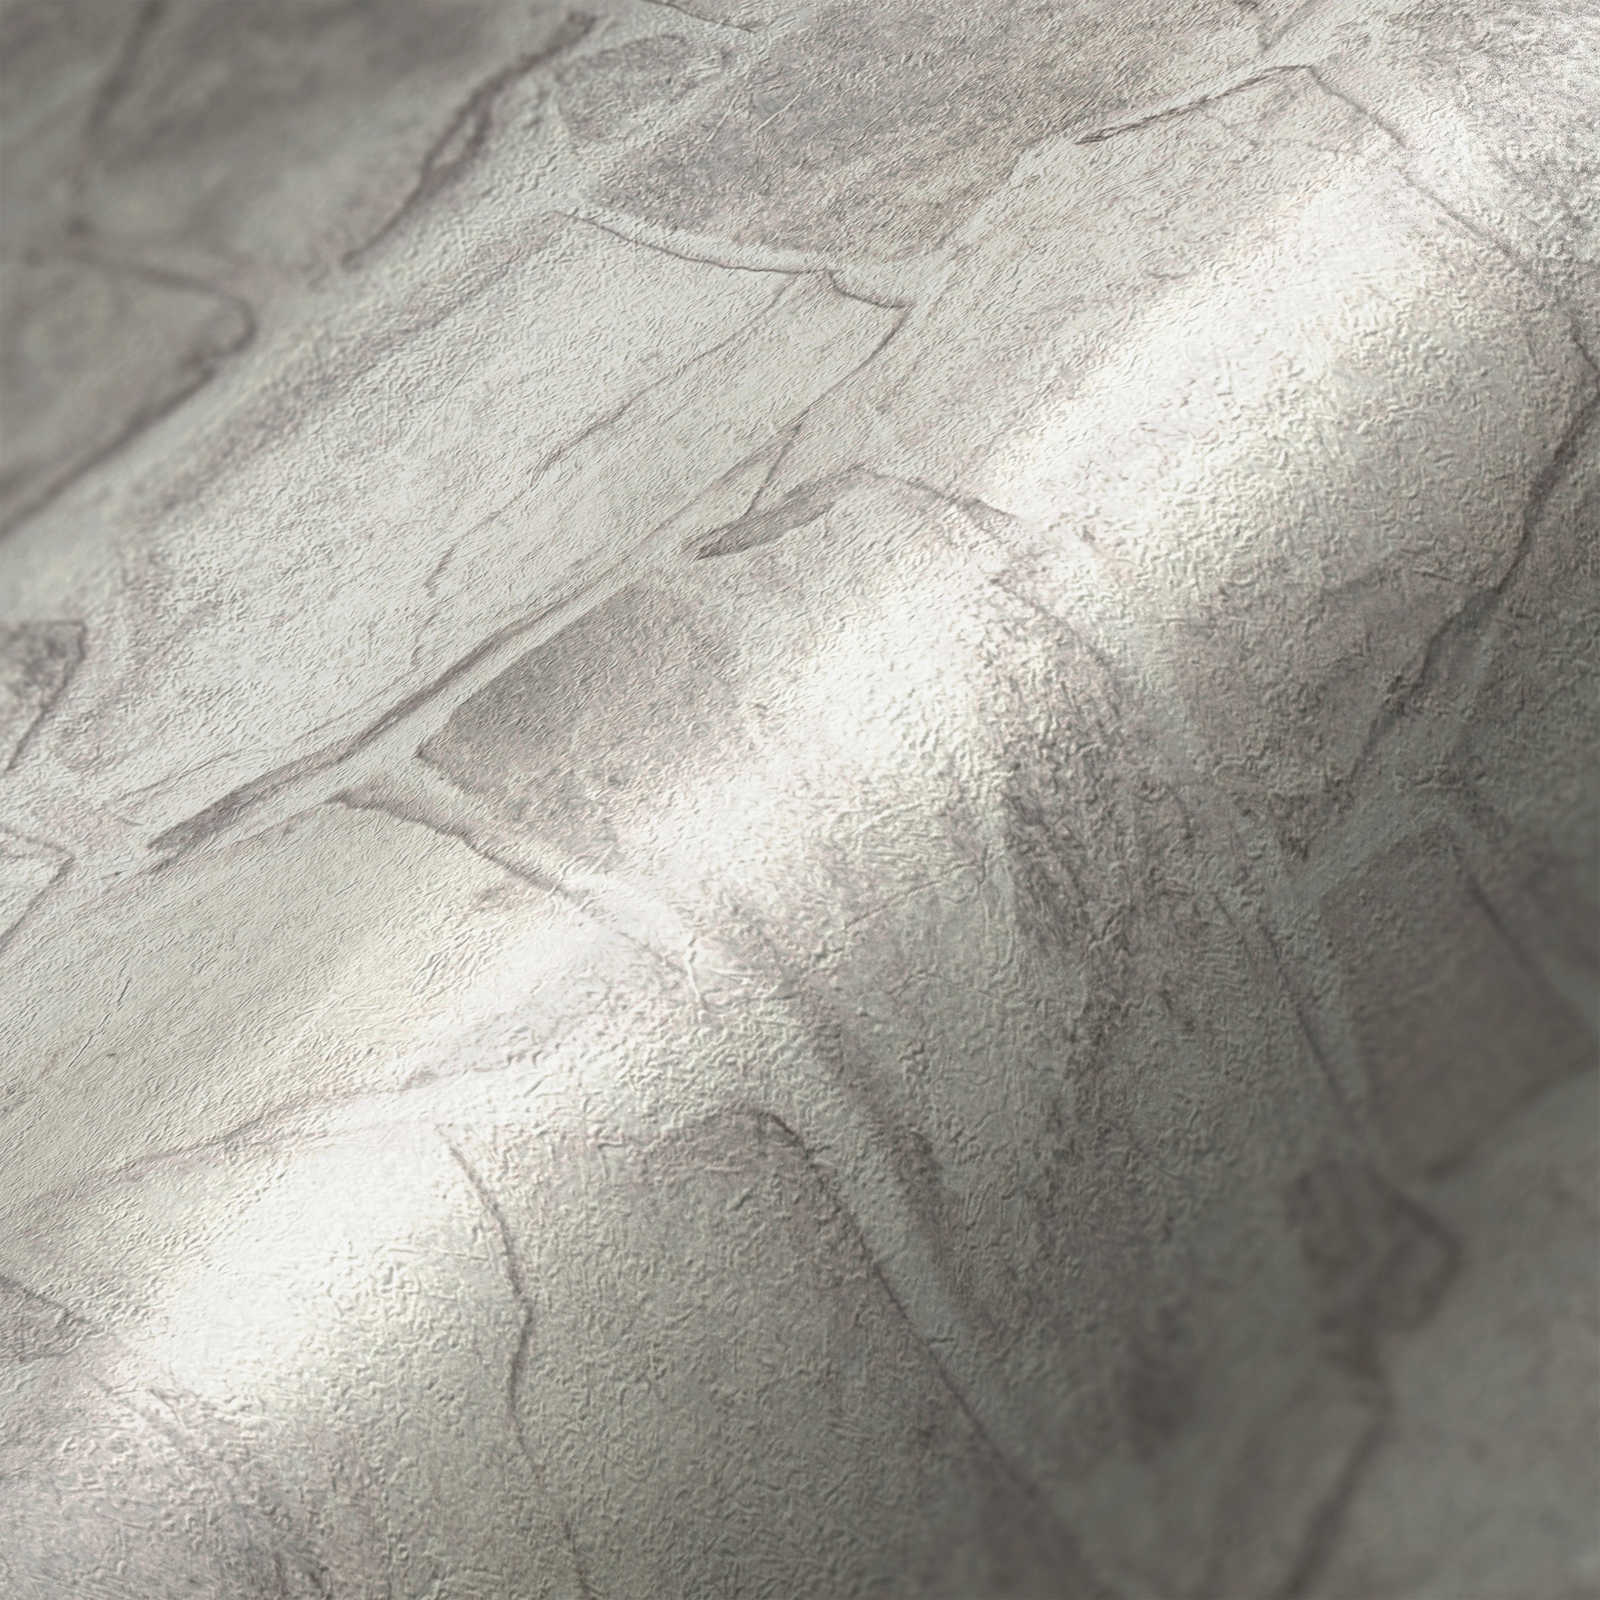             Stone-look non-woven wallpaper with 3D effect brickwork - grey, white, grey
        